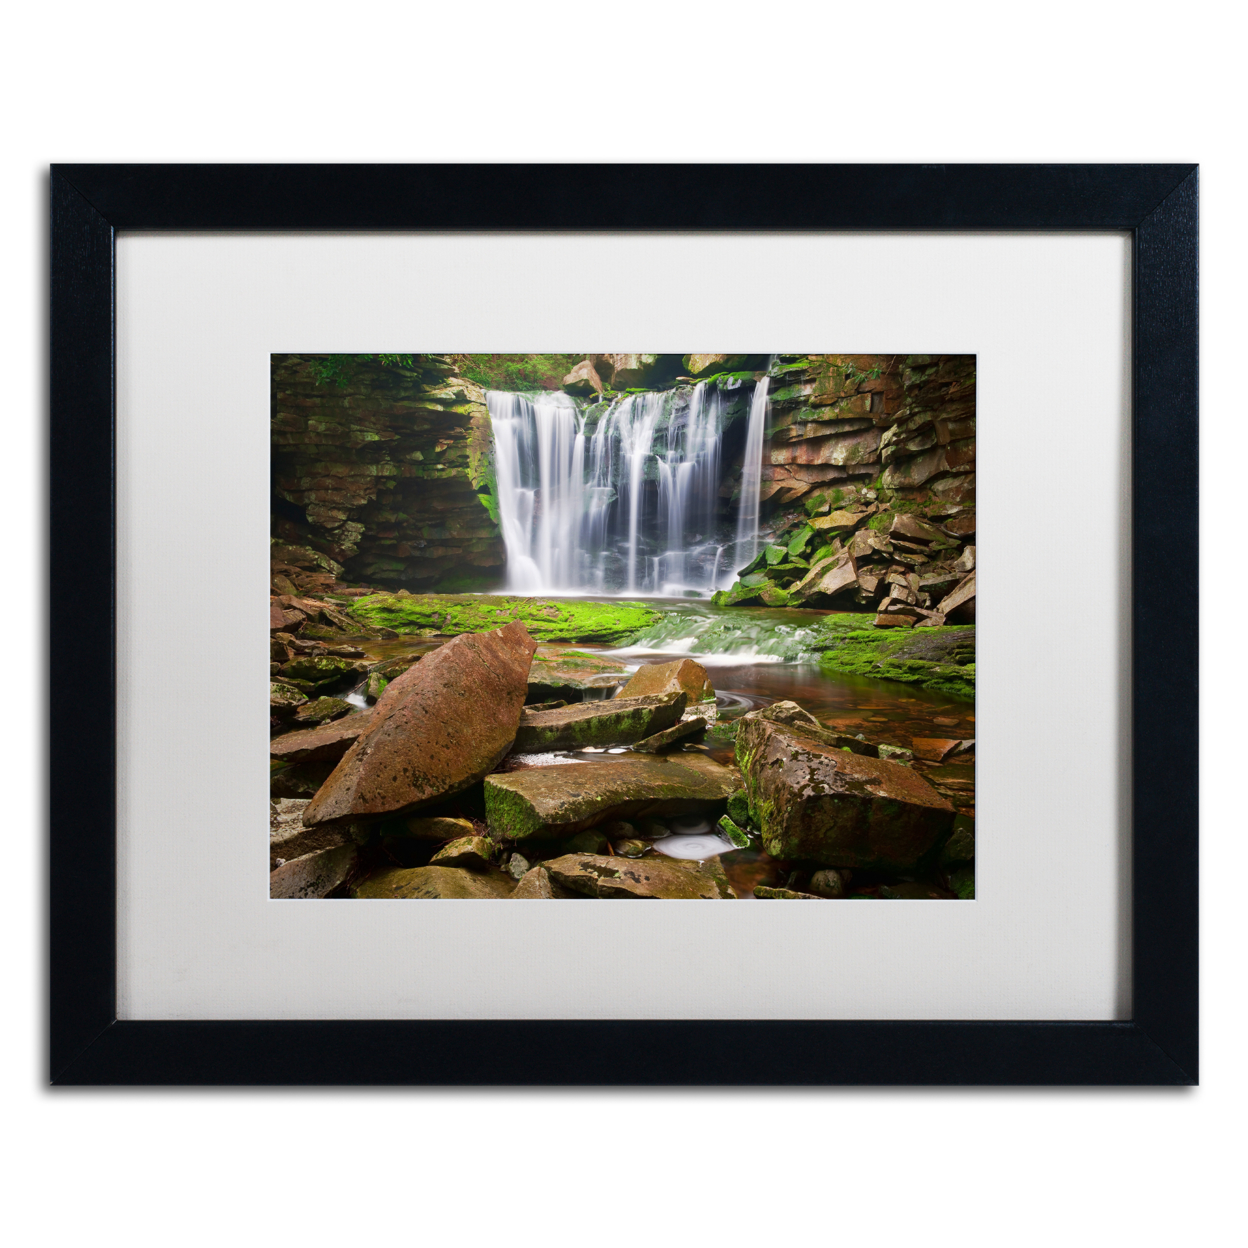 Michael Blanchette Photography 'Rock Pointers' Black Wooden Framed Art 18 X 22 Inches